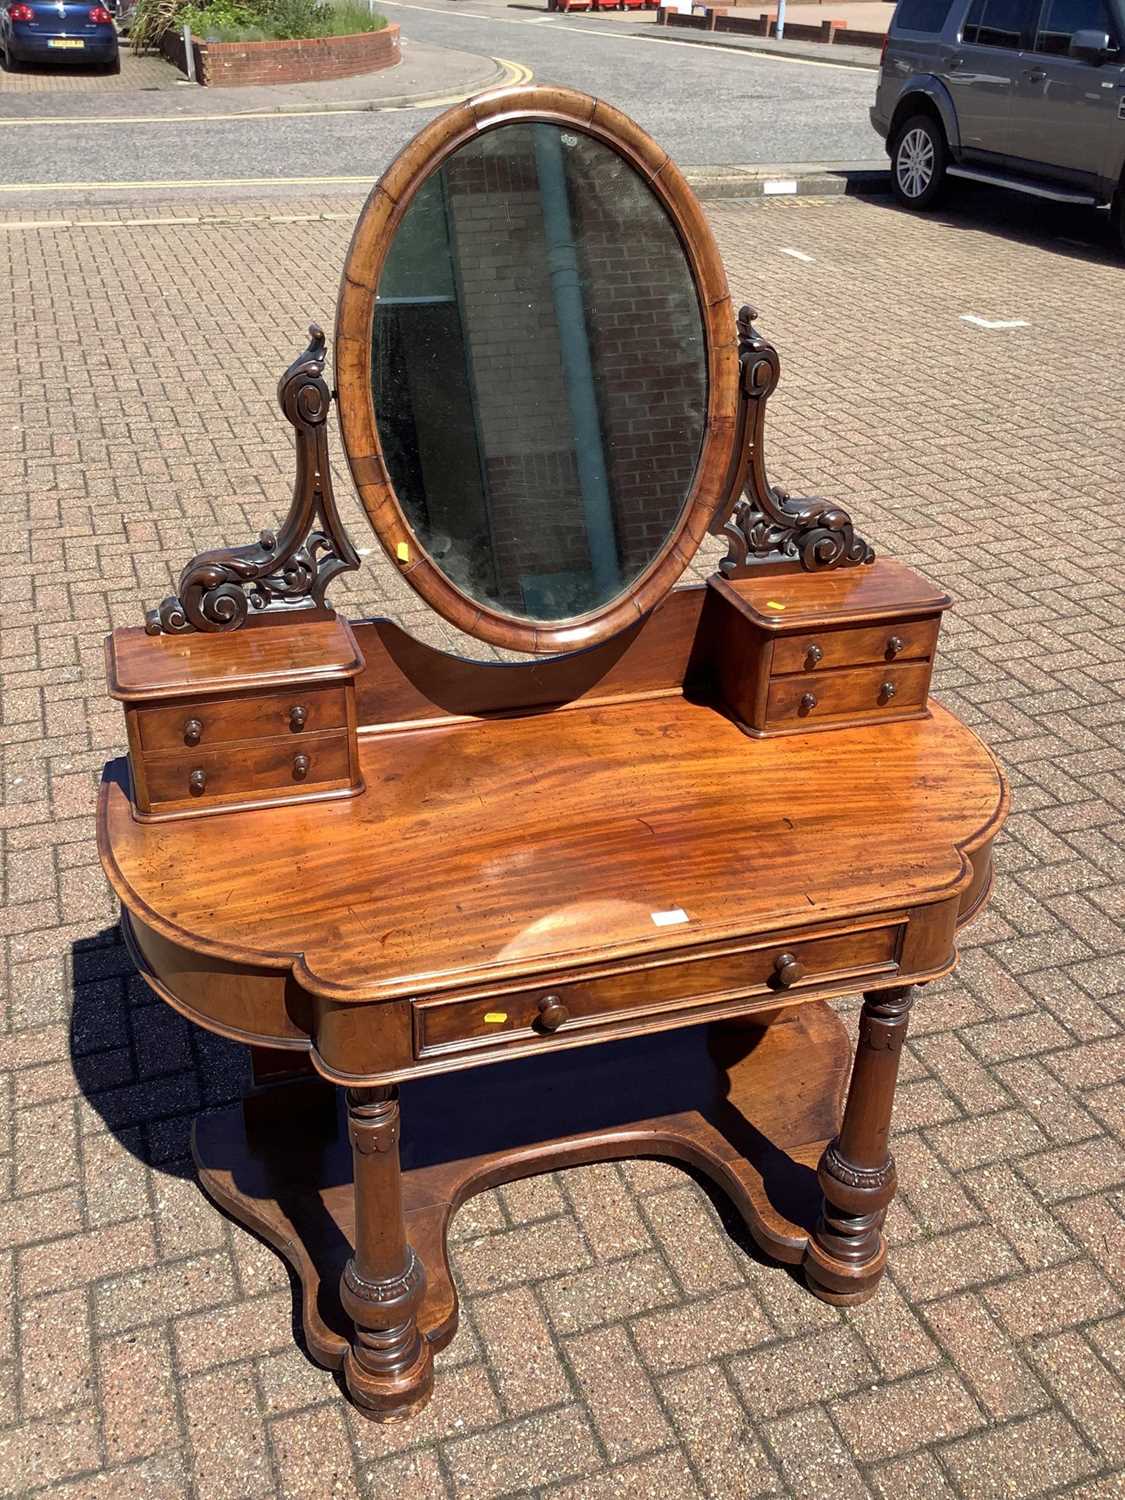 Lot 147 - Victorian mahogany dressing table with raised mirror back and drawers below on turned front legs joined by shaped stretcher, 121cm wide x 58cm deep